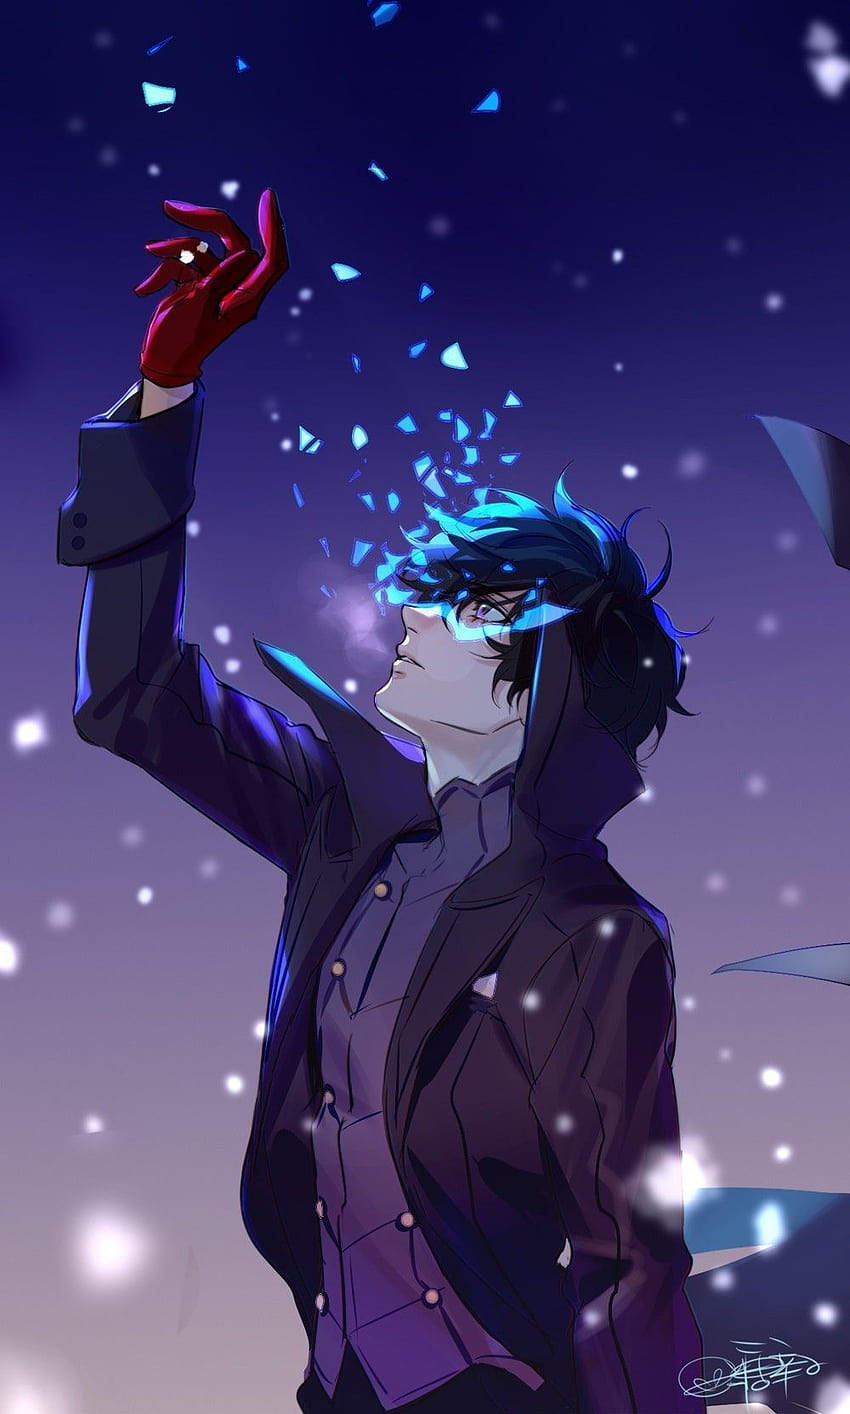 1920x1080 / 1920x1080 Persona 5, Joker (Persona), Video Game, Anime  wallpaper JPG - Coolwallpapers.me!